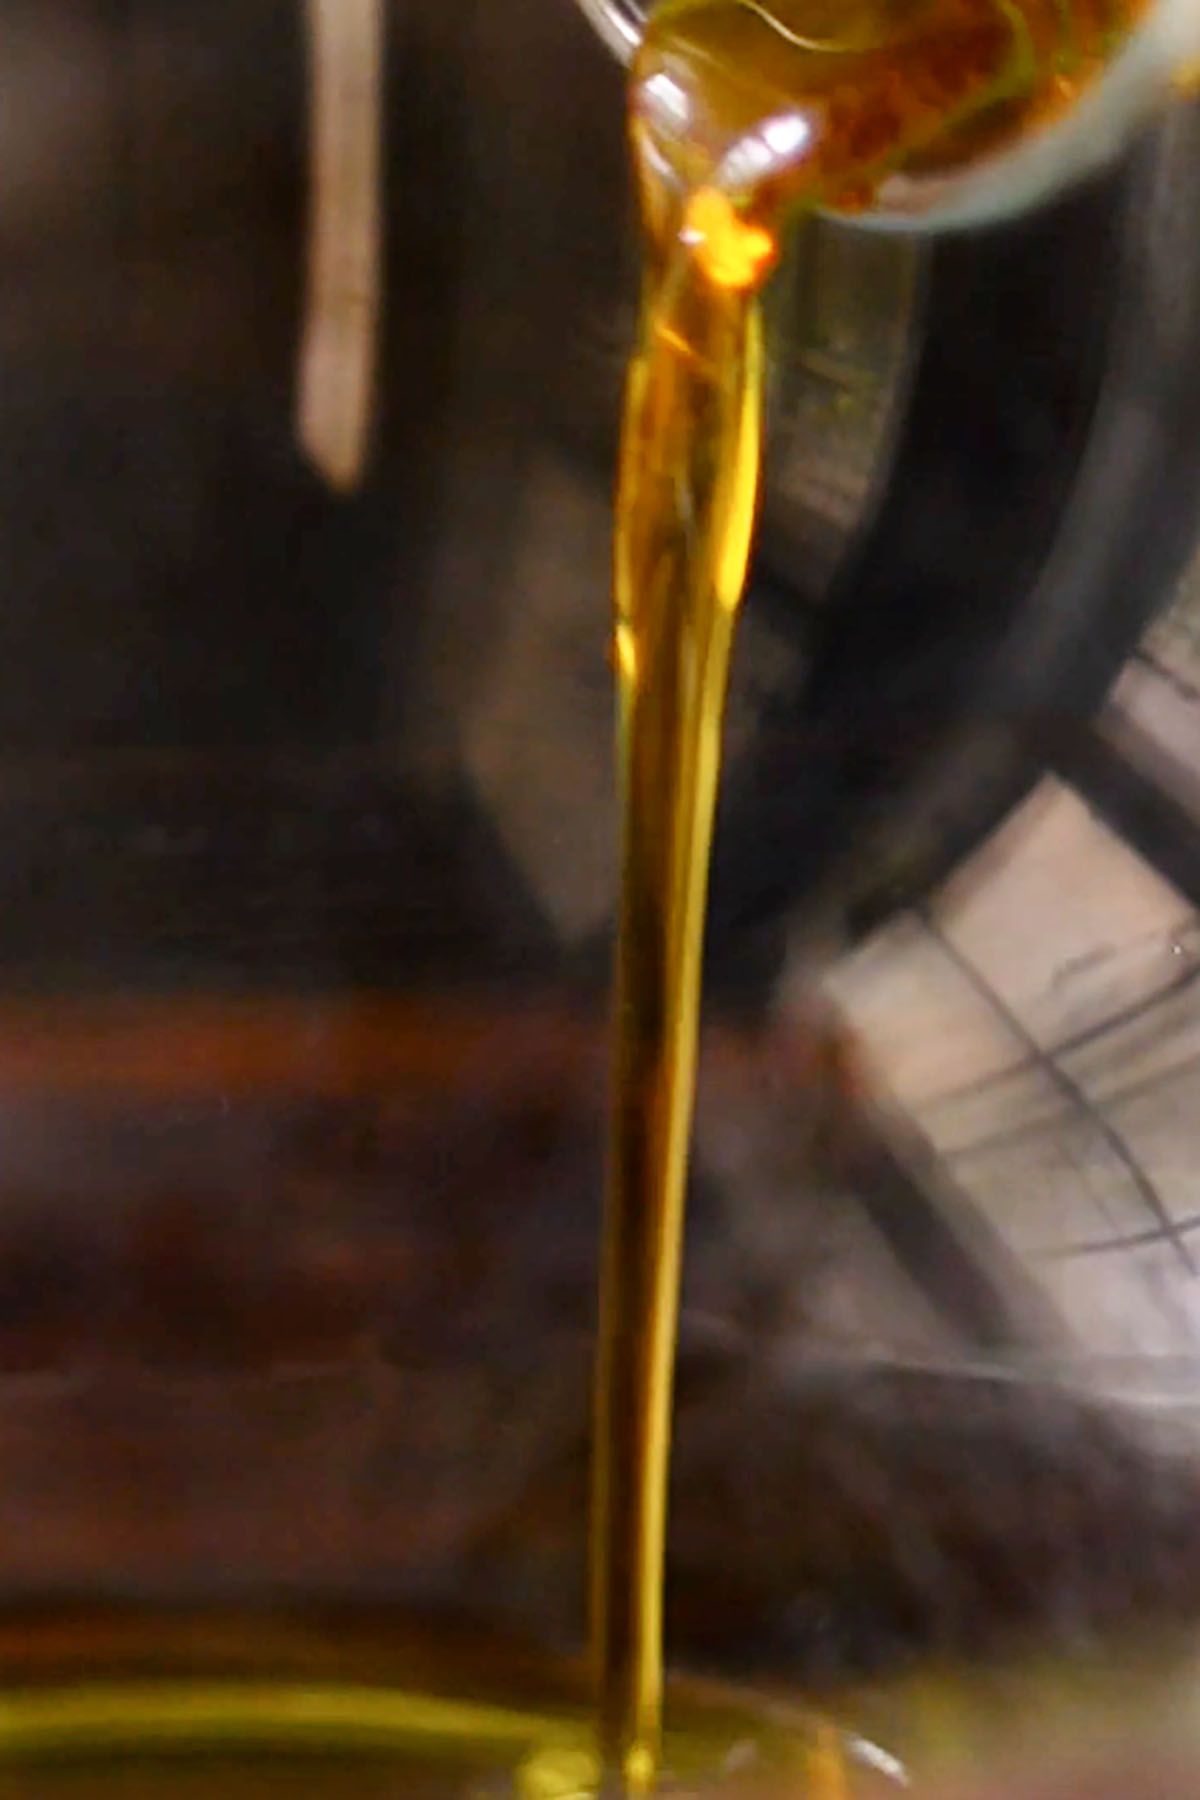 Maple syrup being added to a glass mixing bowl.